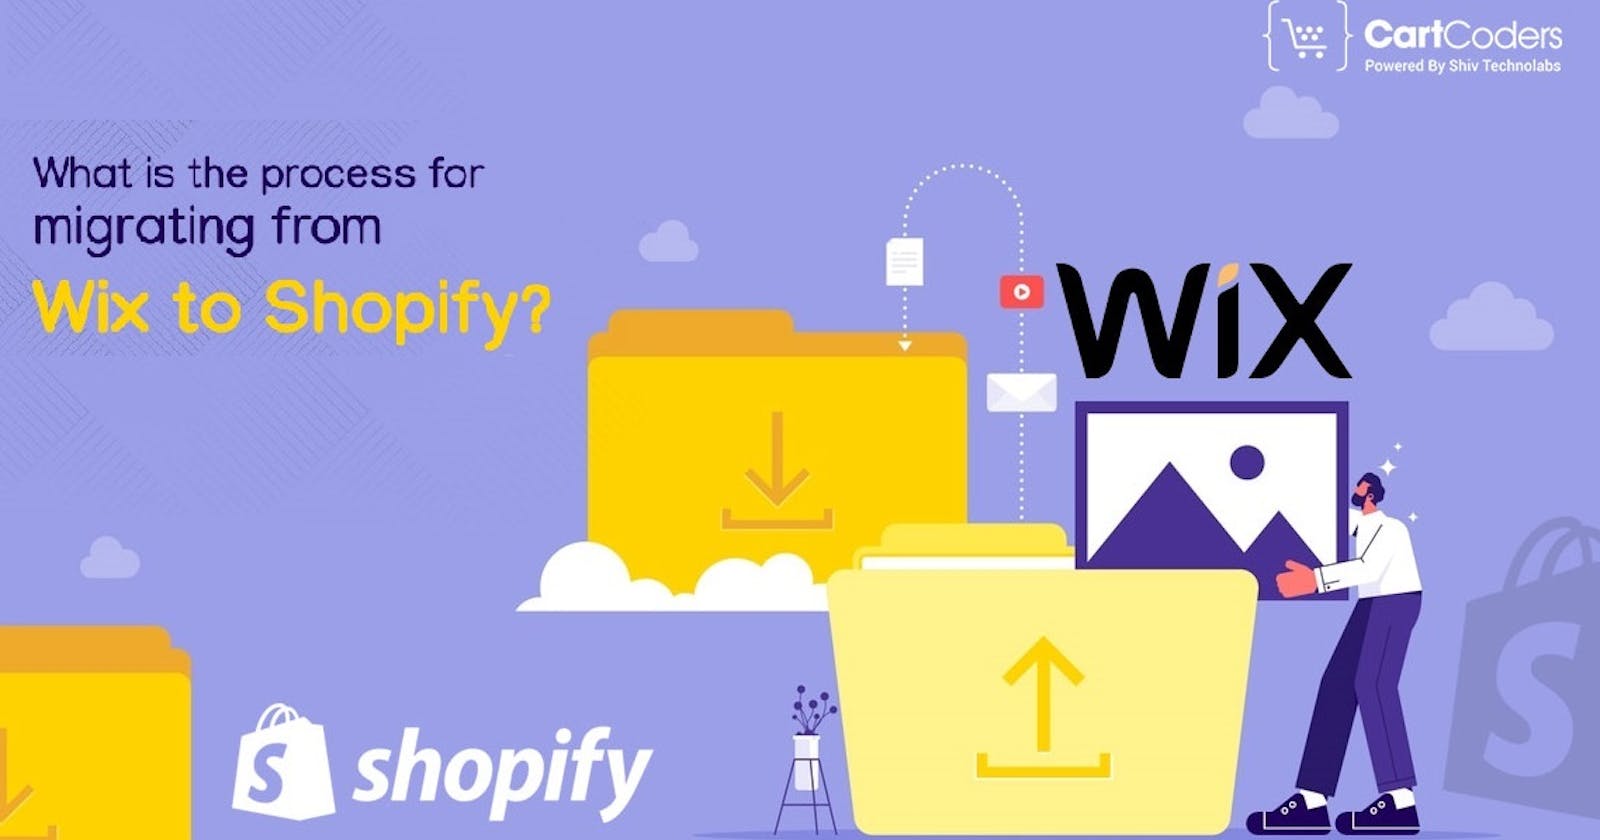 What Is the Process for Migrating from Wix to Shopify?